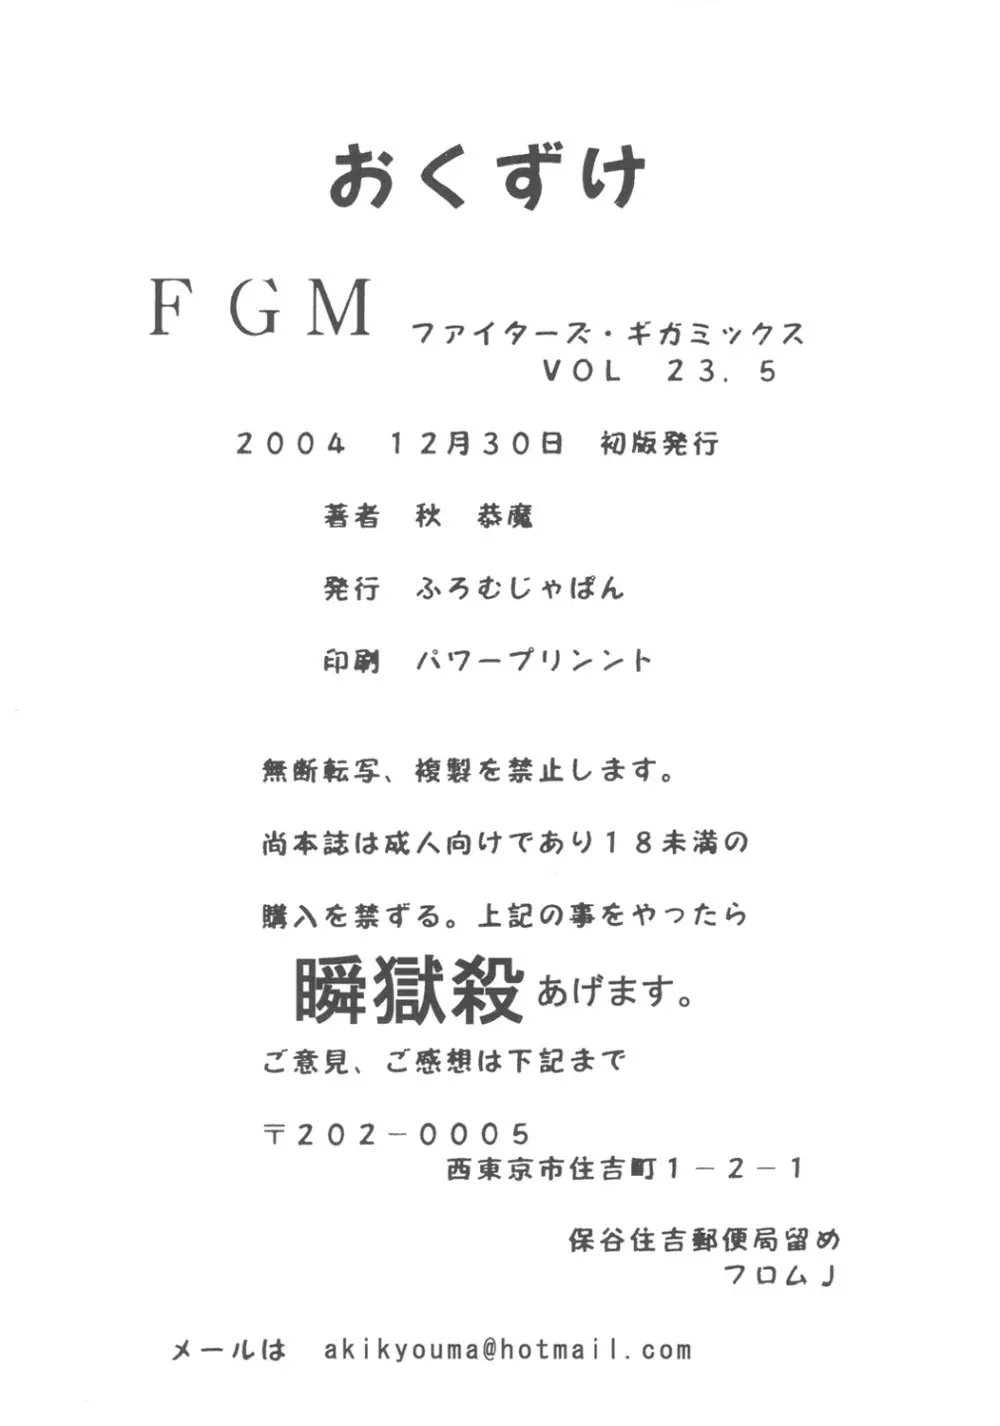 FIGHTERS GIGAMIX FGM Vol. 23.5 15ページ